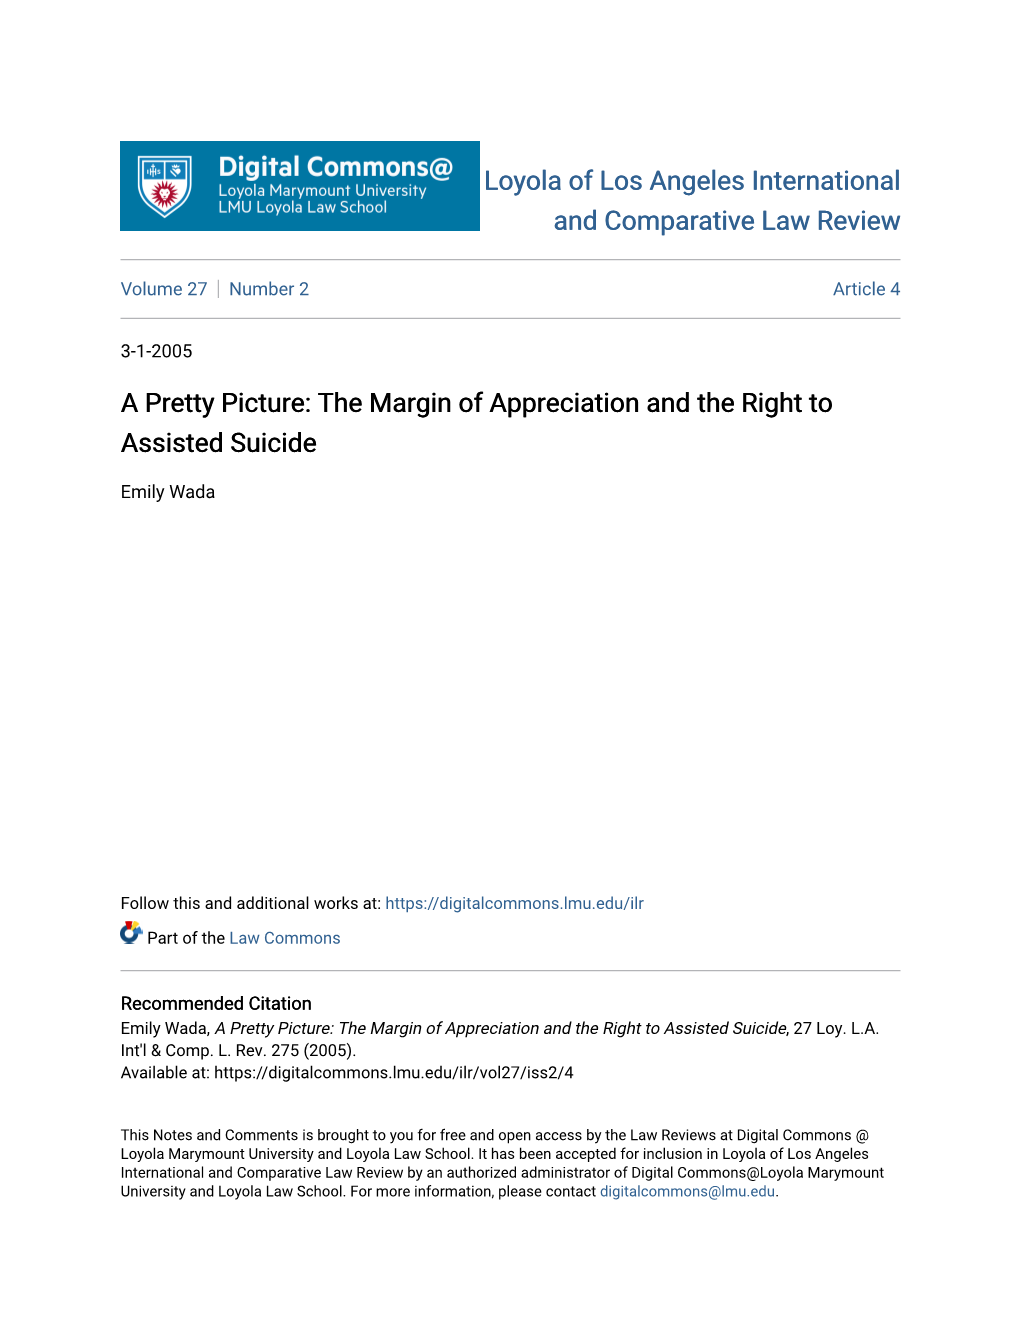 The Margin of Appreciation and the Right to Assisted Suicide